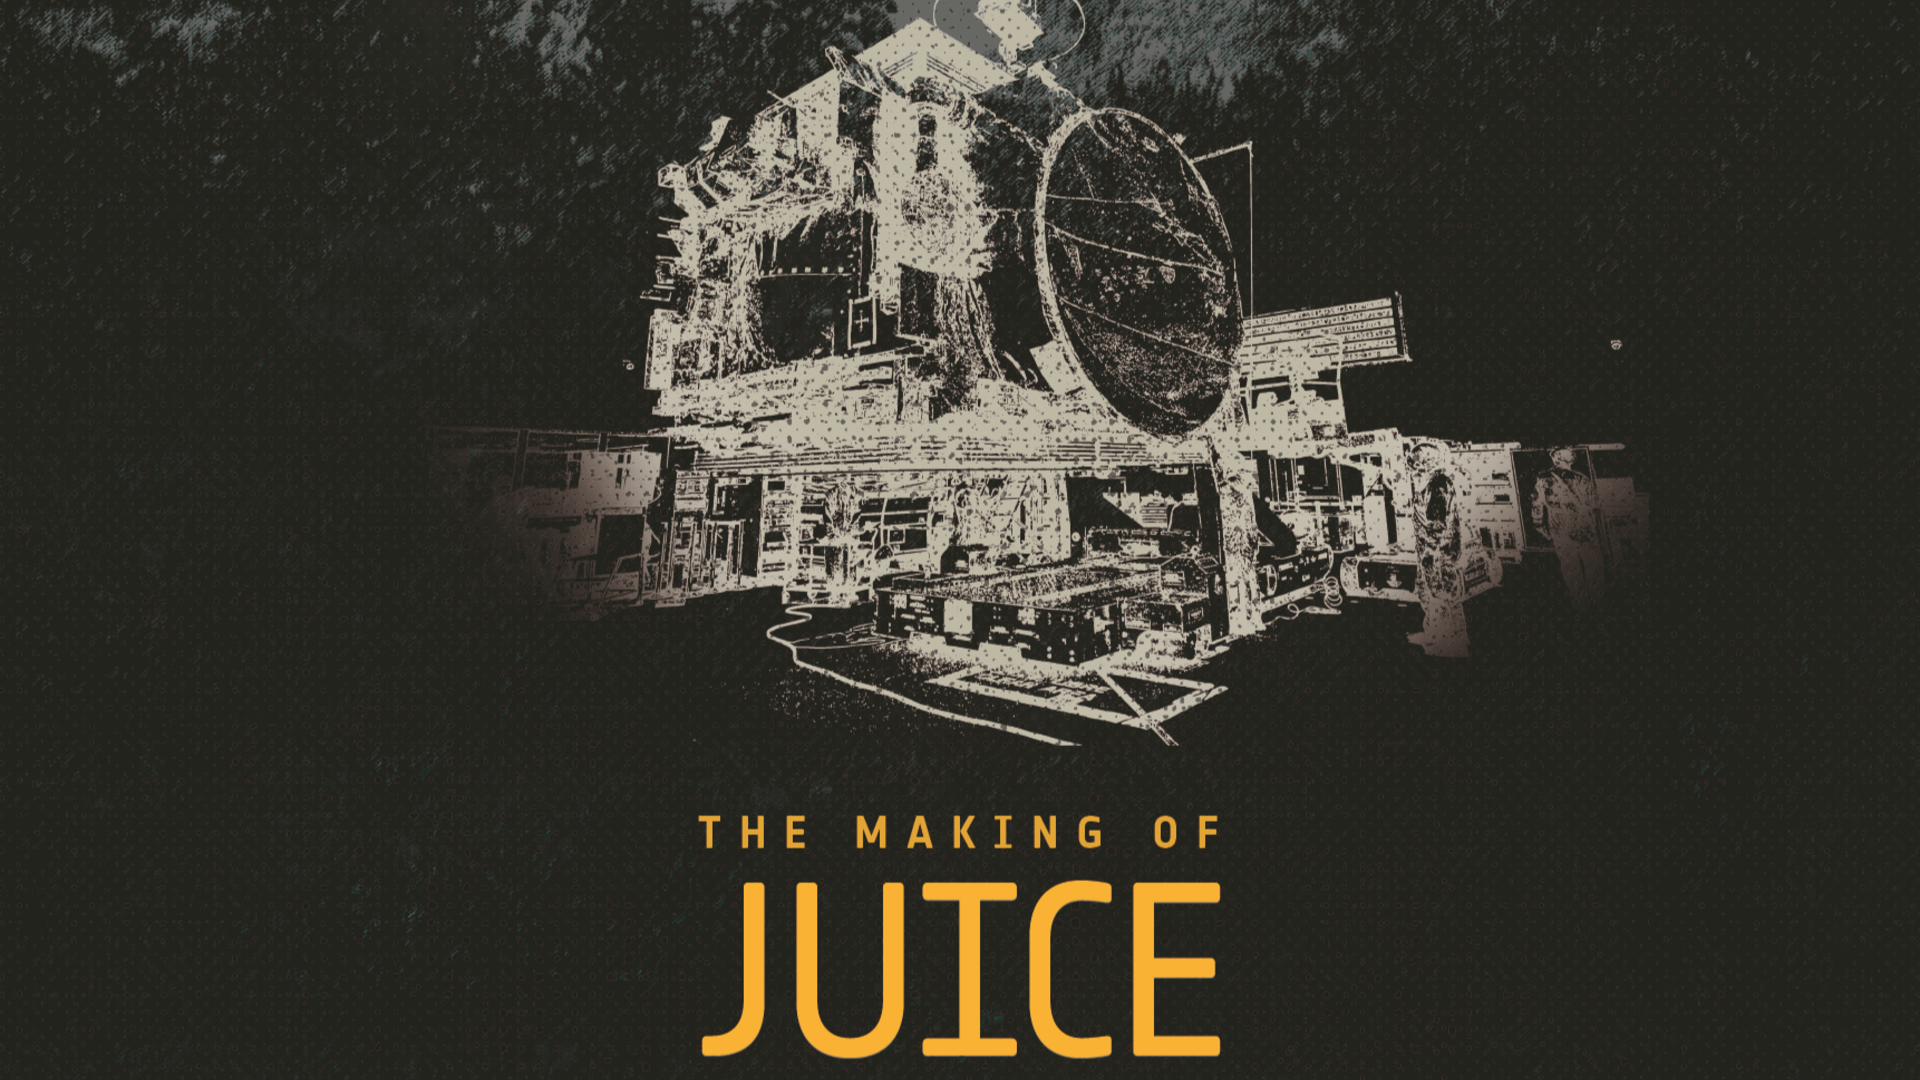 ‘The Making of JUICE’ film documents how scientists built a Jupiter-bound spacecraft against the odds Space